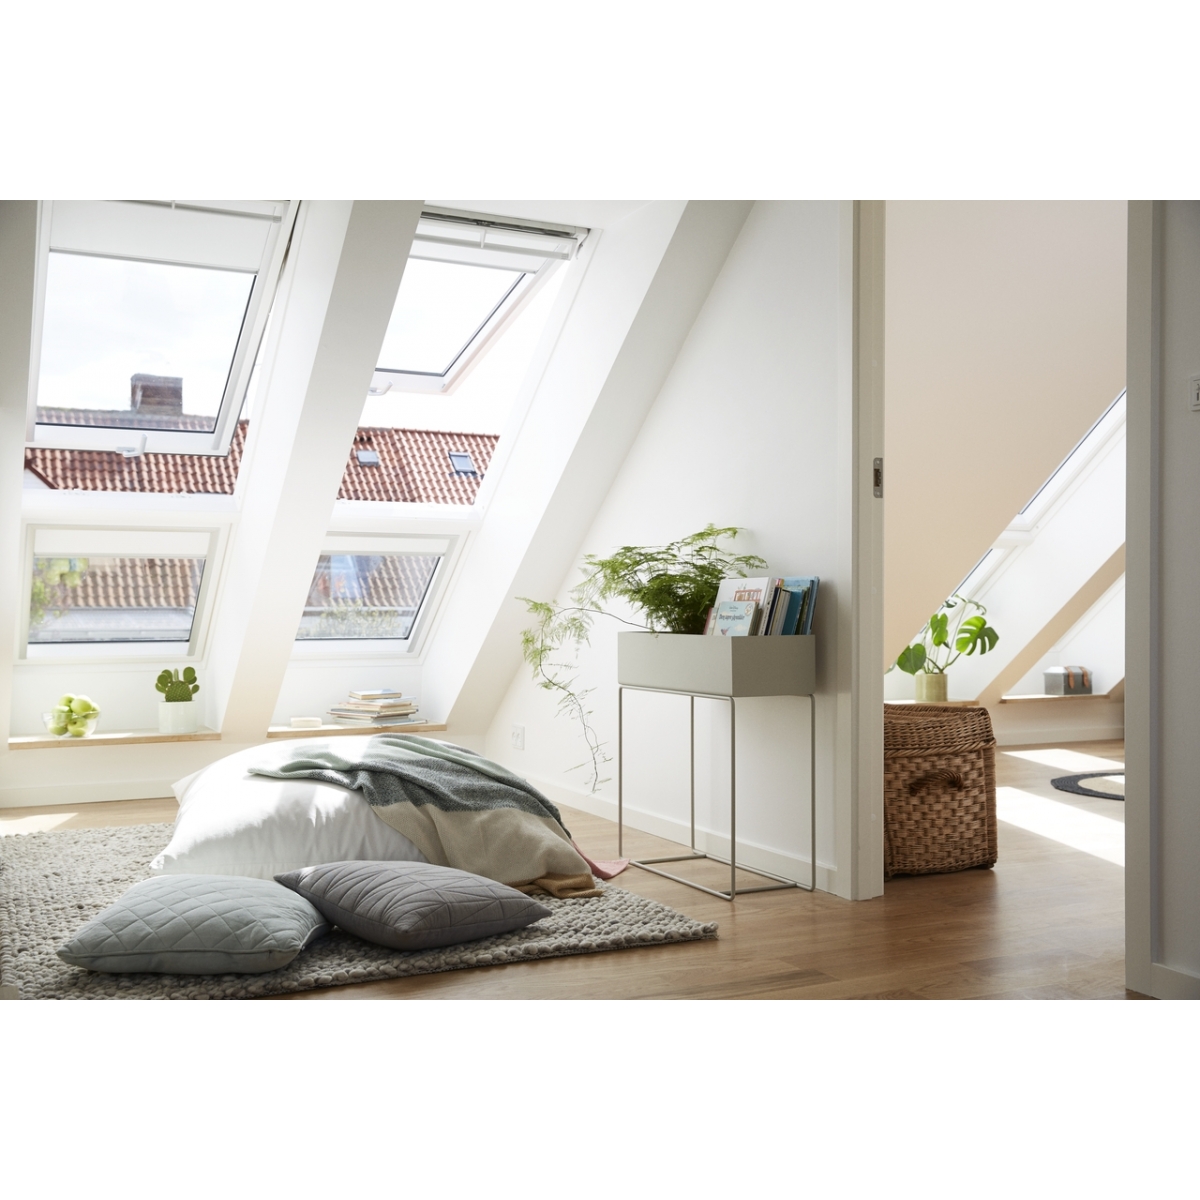 Velux Electric blackout blind DML White 1025 Standard photo in detail